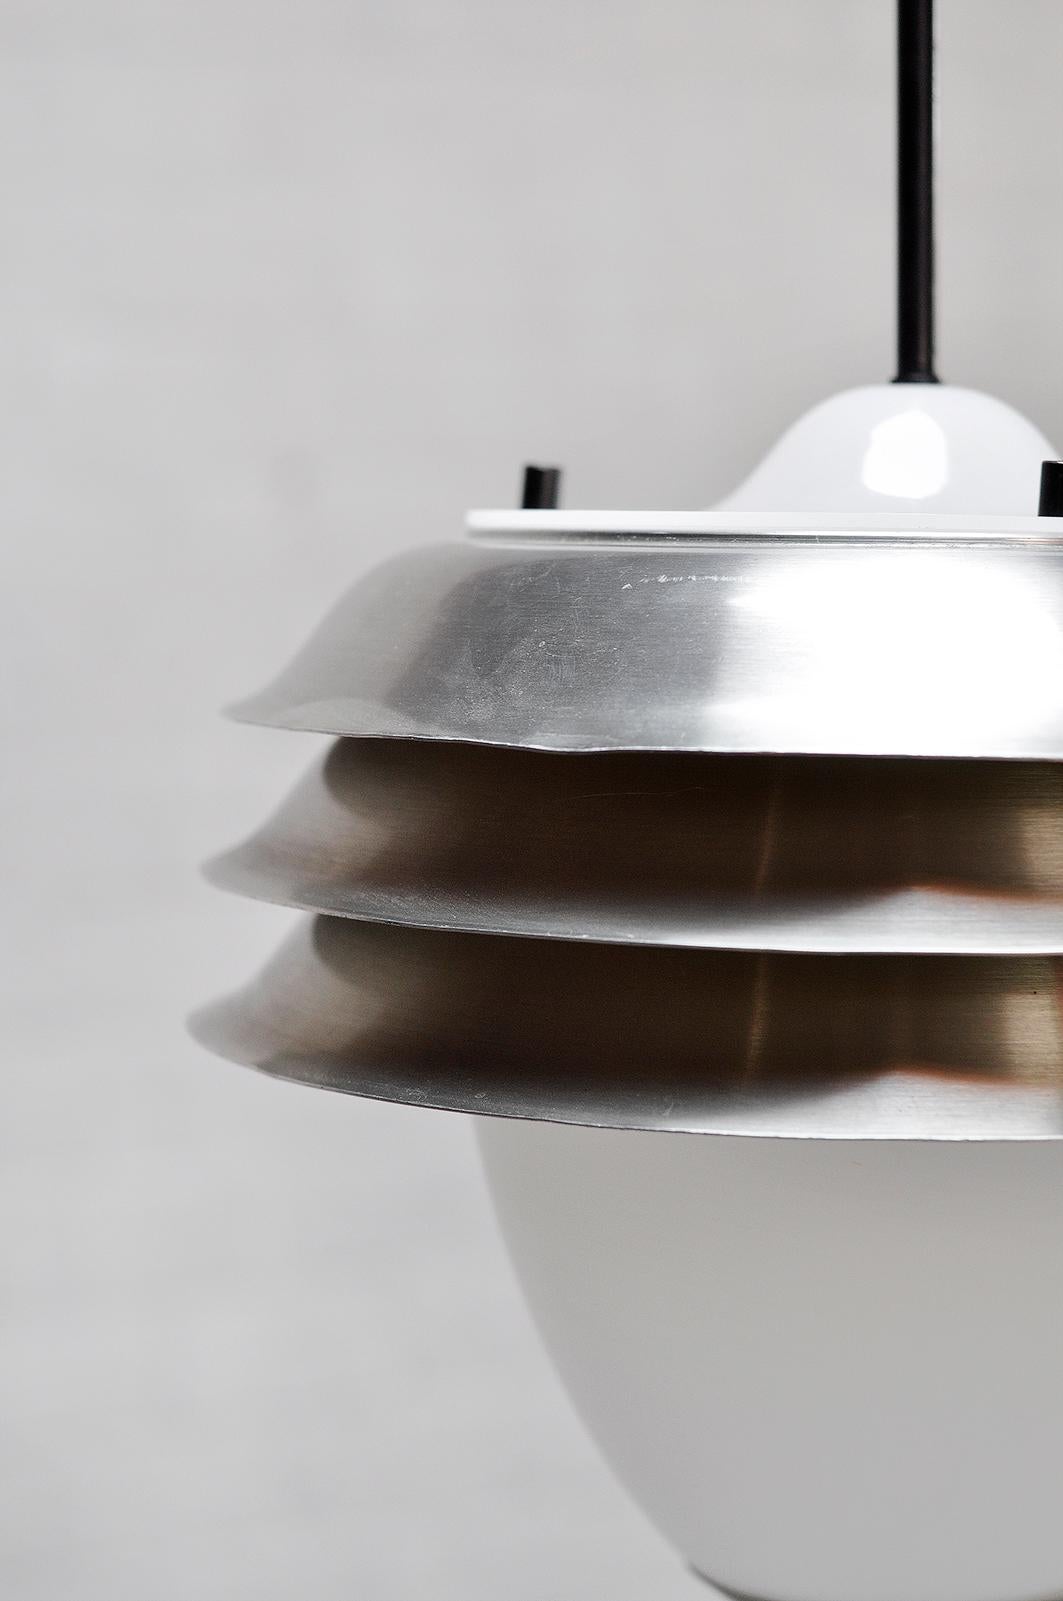 Mid-20th Century Italian Metal & Opal Glass Table Lamp Attributed to Stilnovo, 1960s For Sale